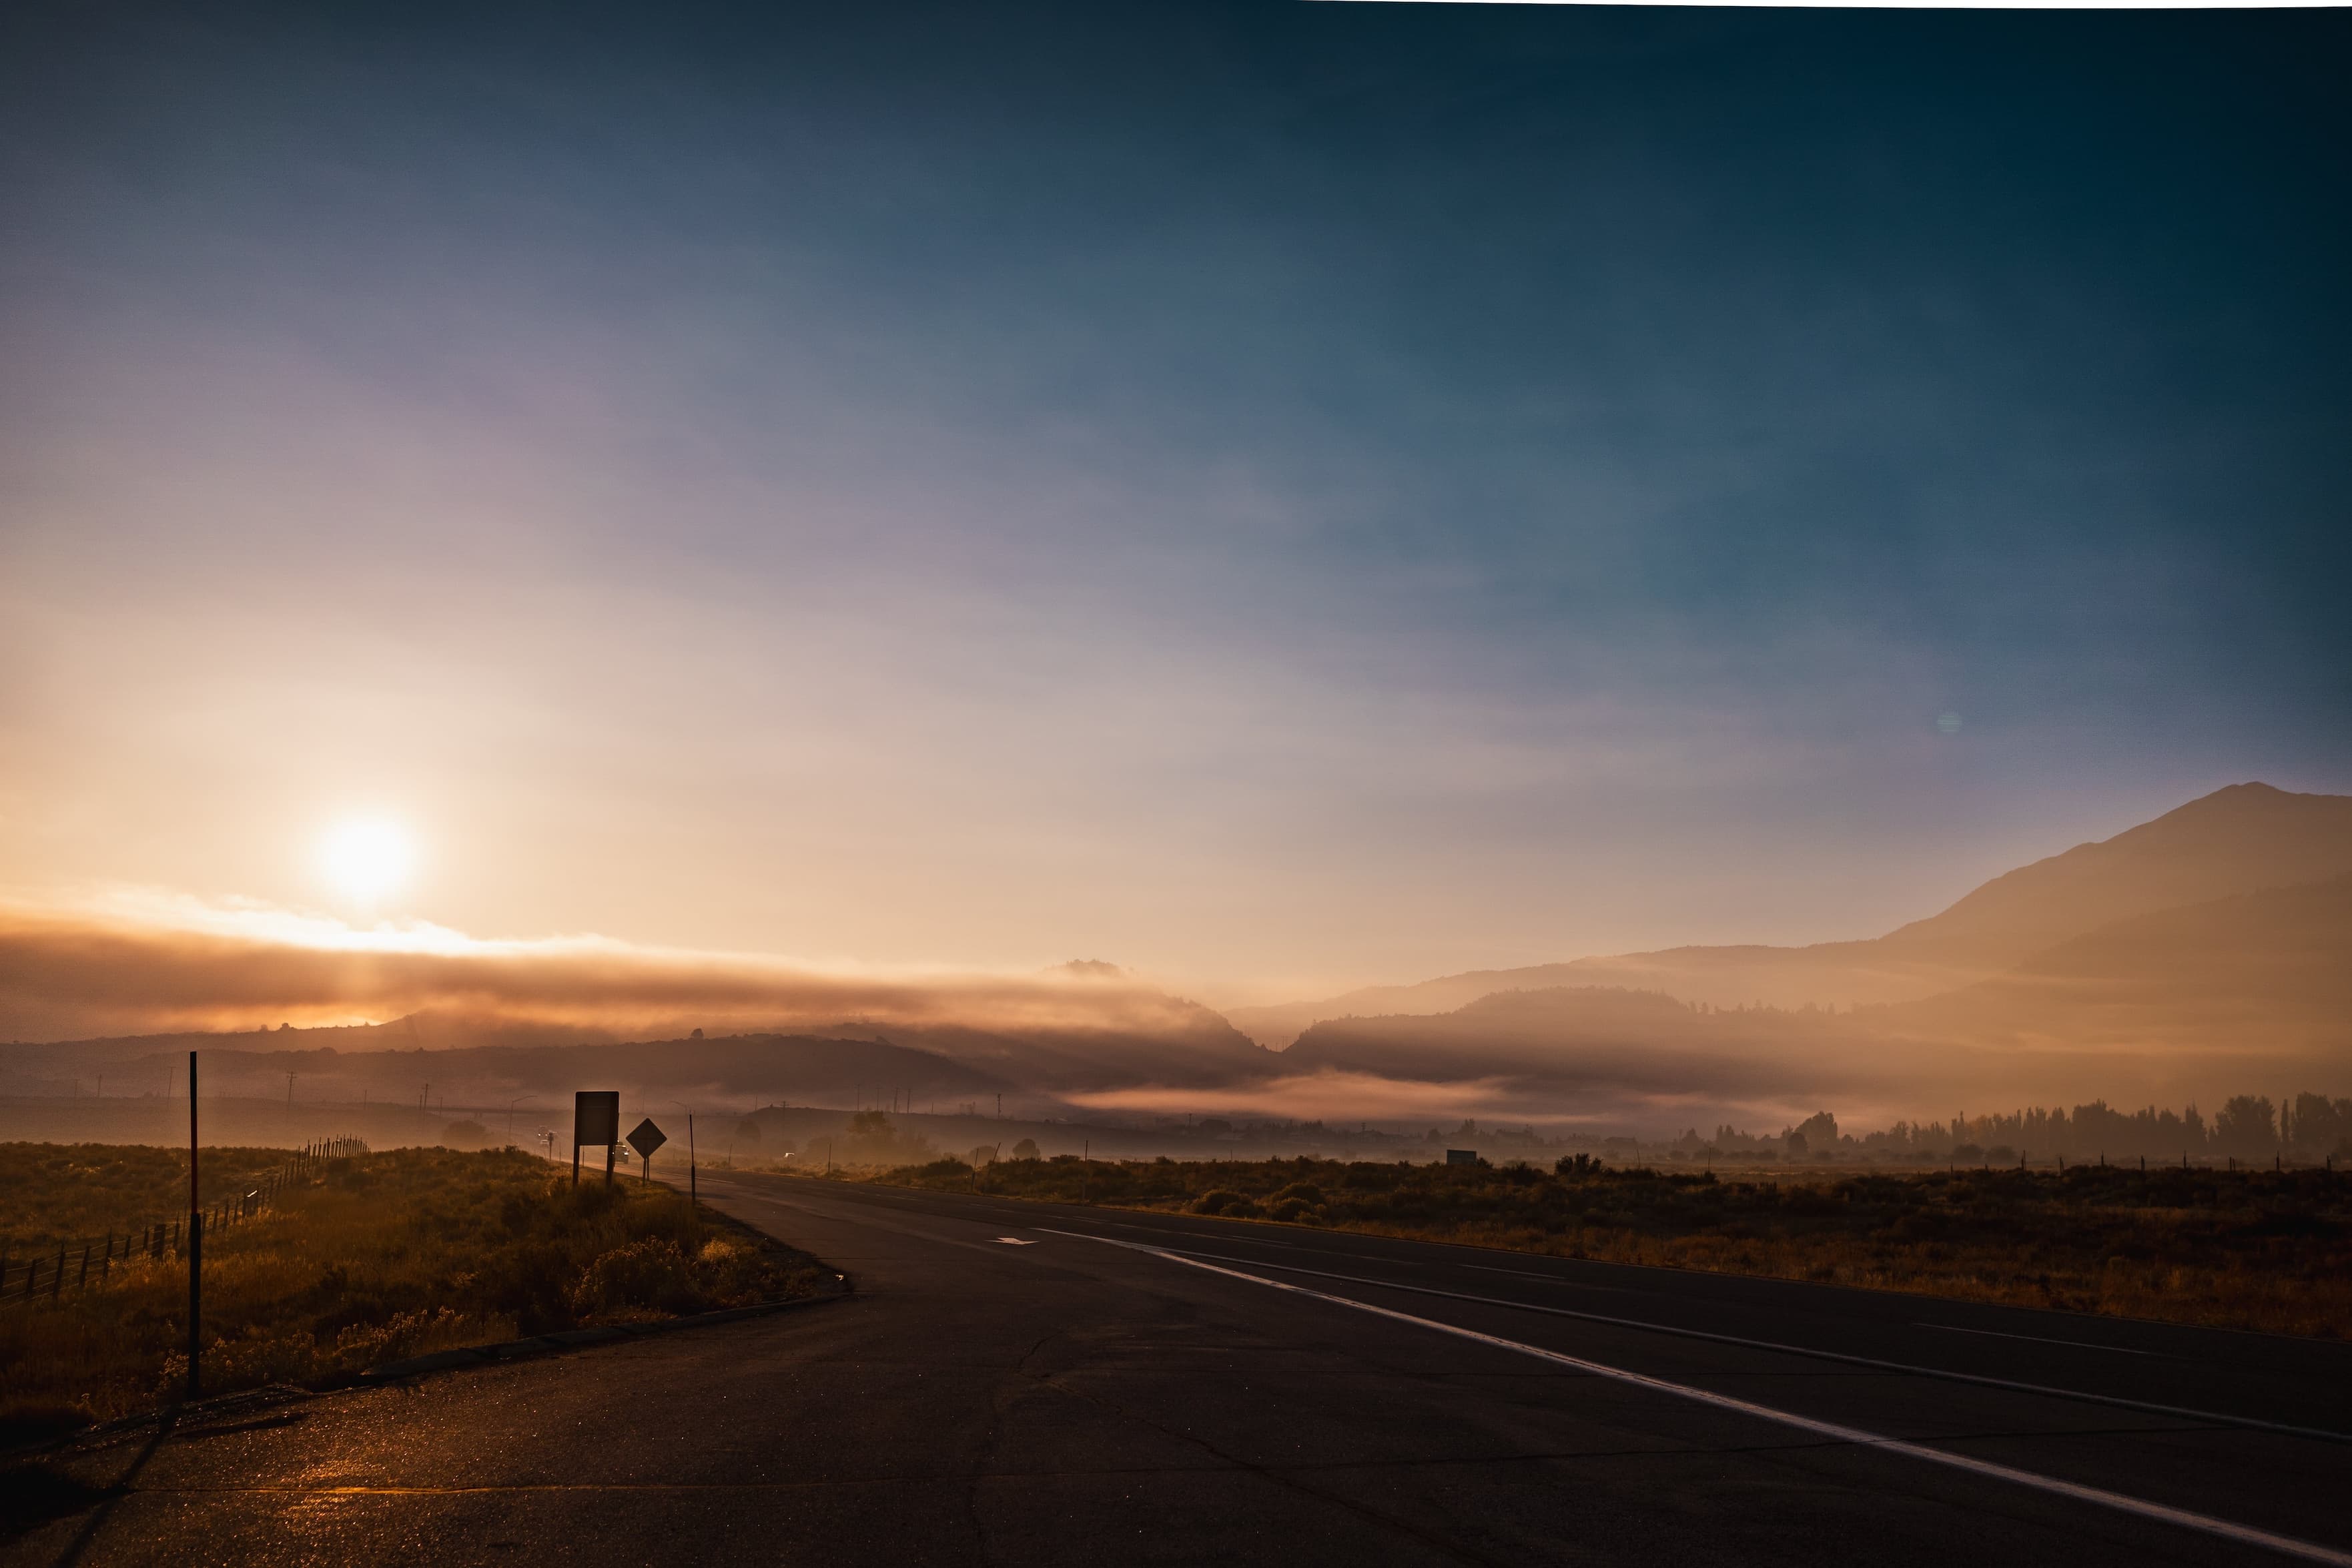 A sunrise scene with the sun hanging low over a misty valley, seen from an empty road with open fields on either side.